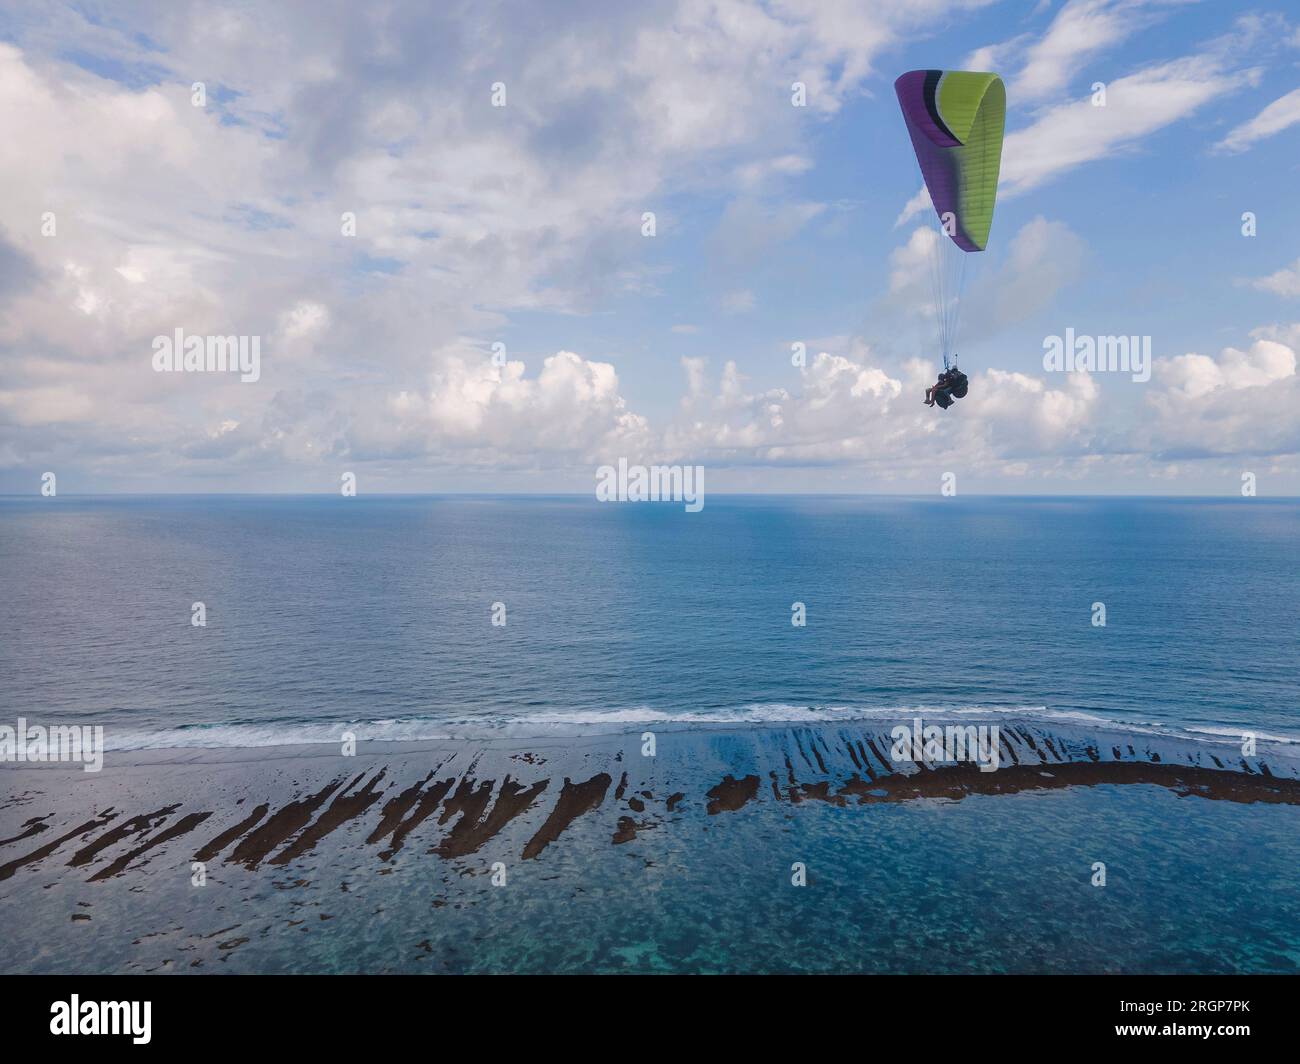 Paraglider soaring high above the sea at sunny day Stock Photo